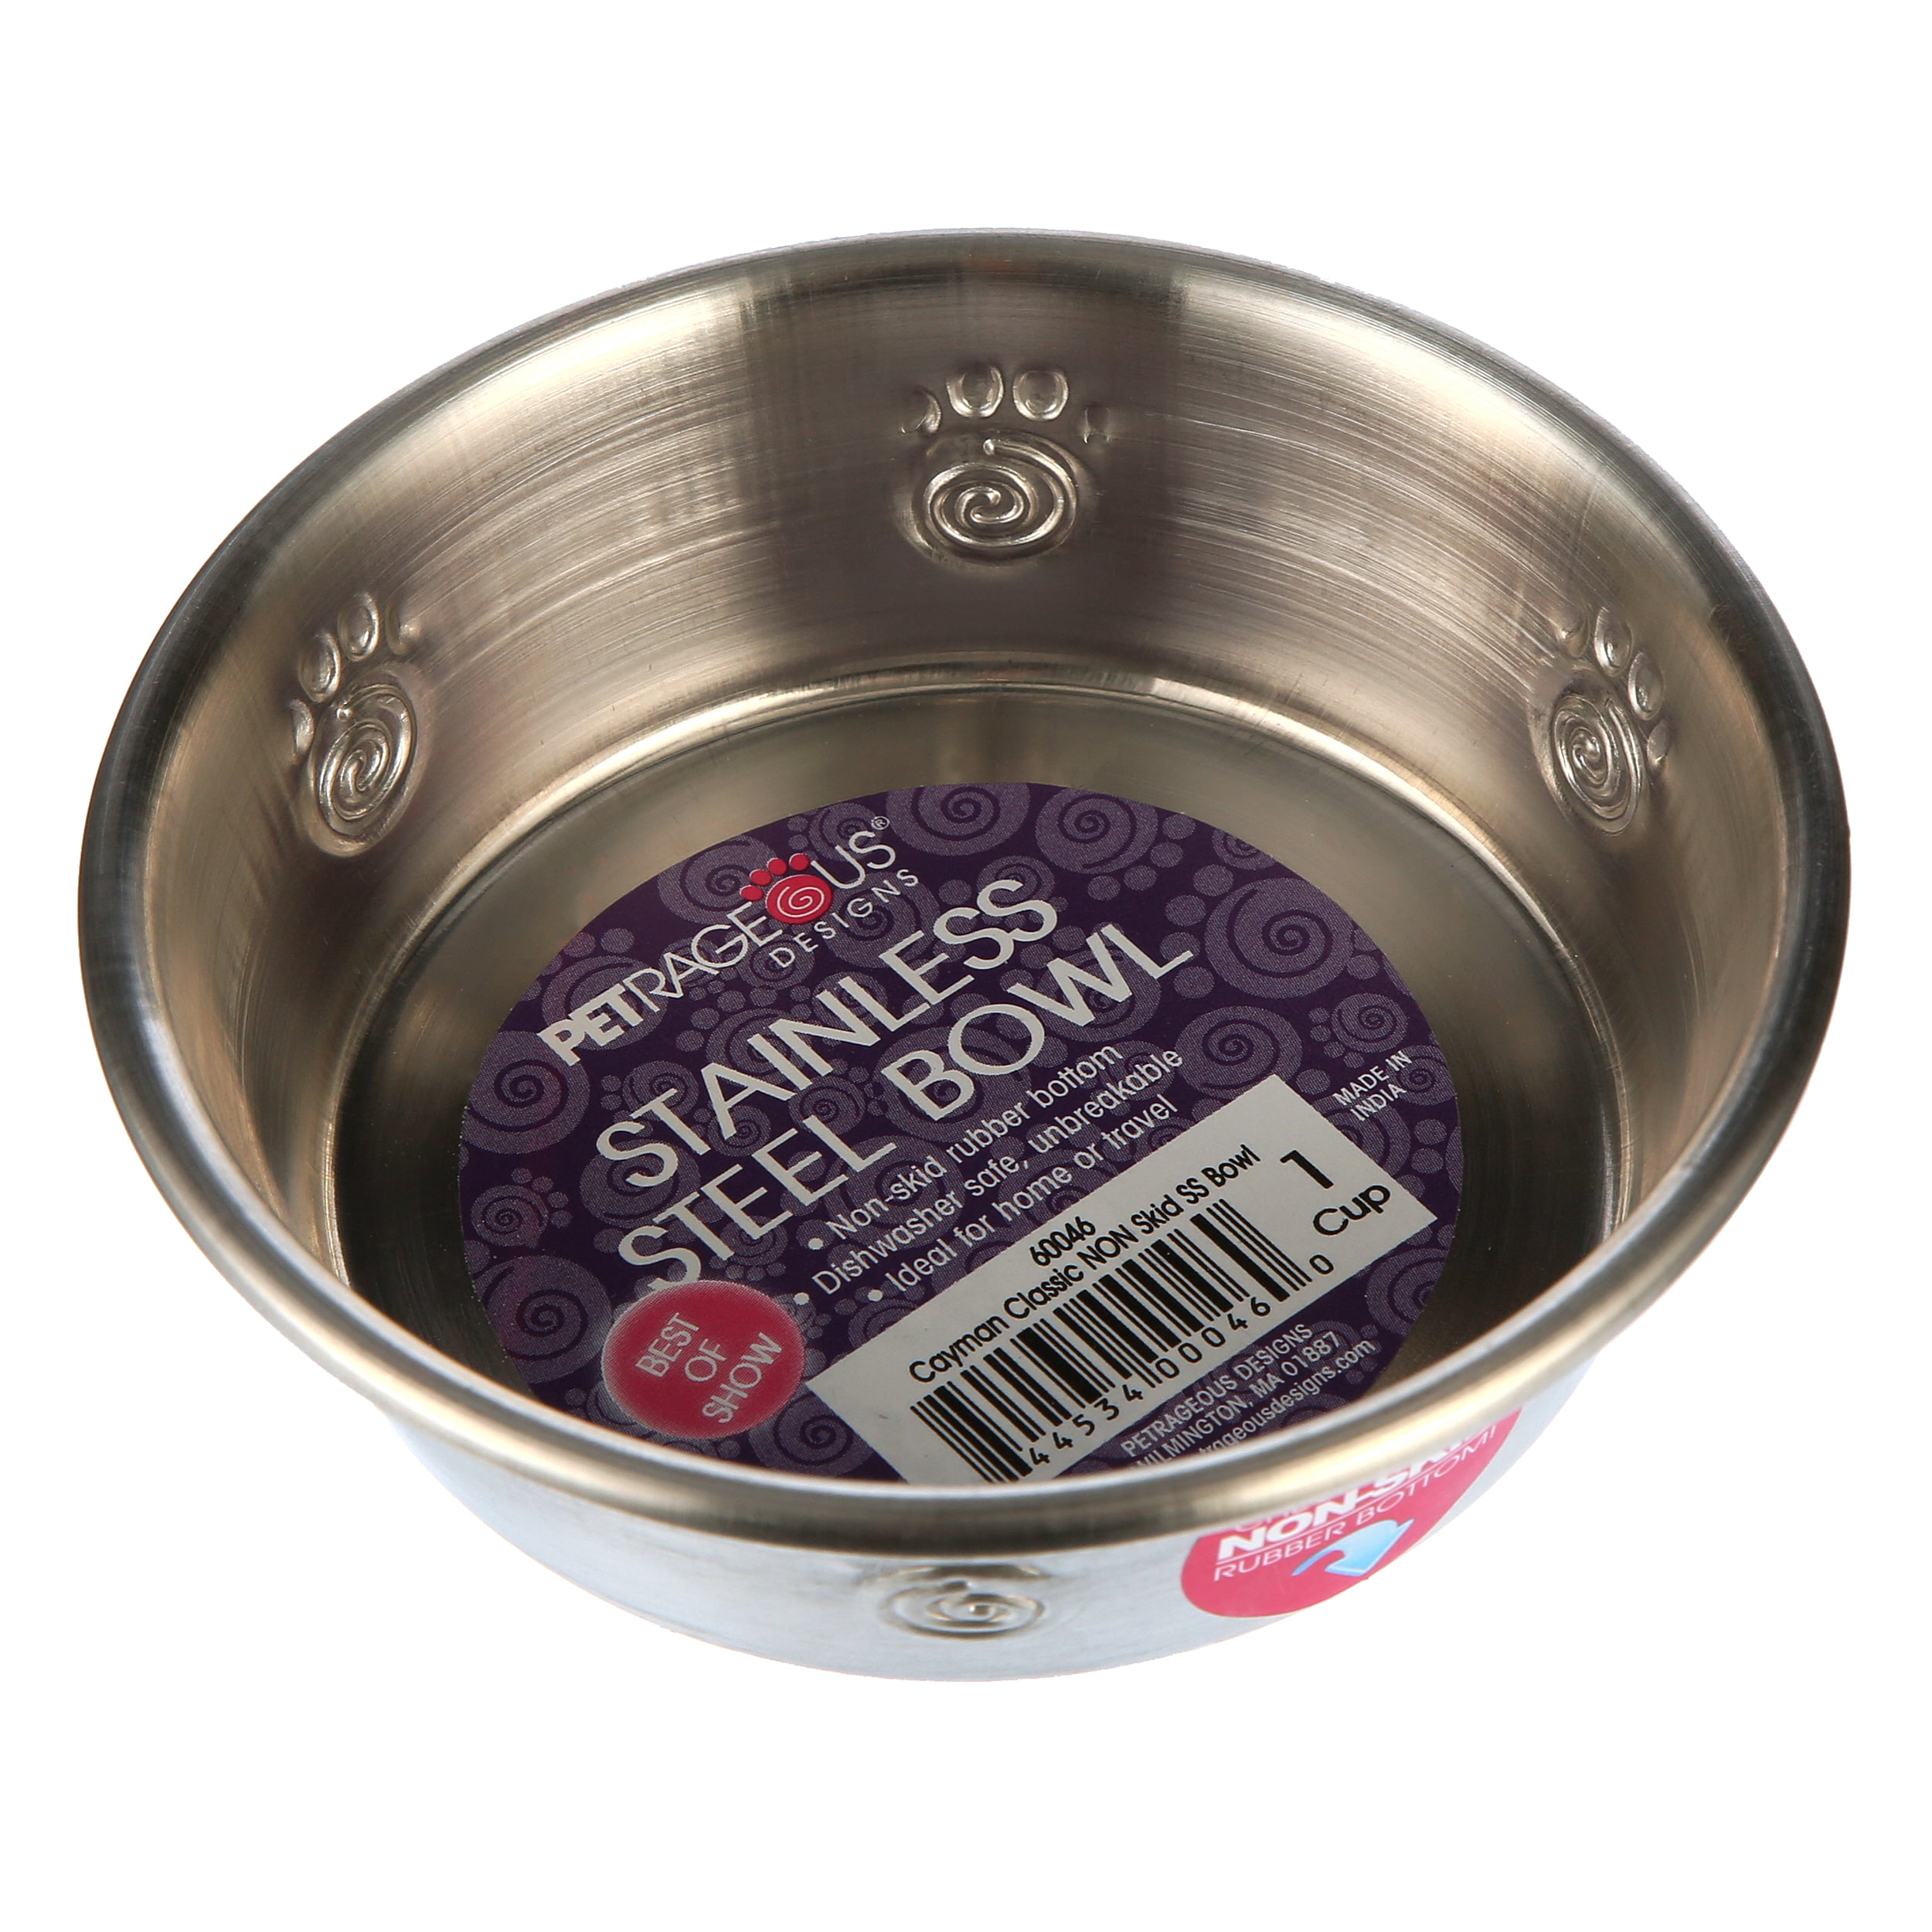 4Knines Stainless Steel Dog Bowl, Stainless Steel